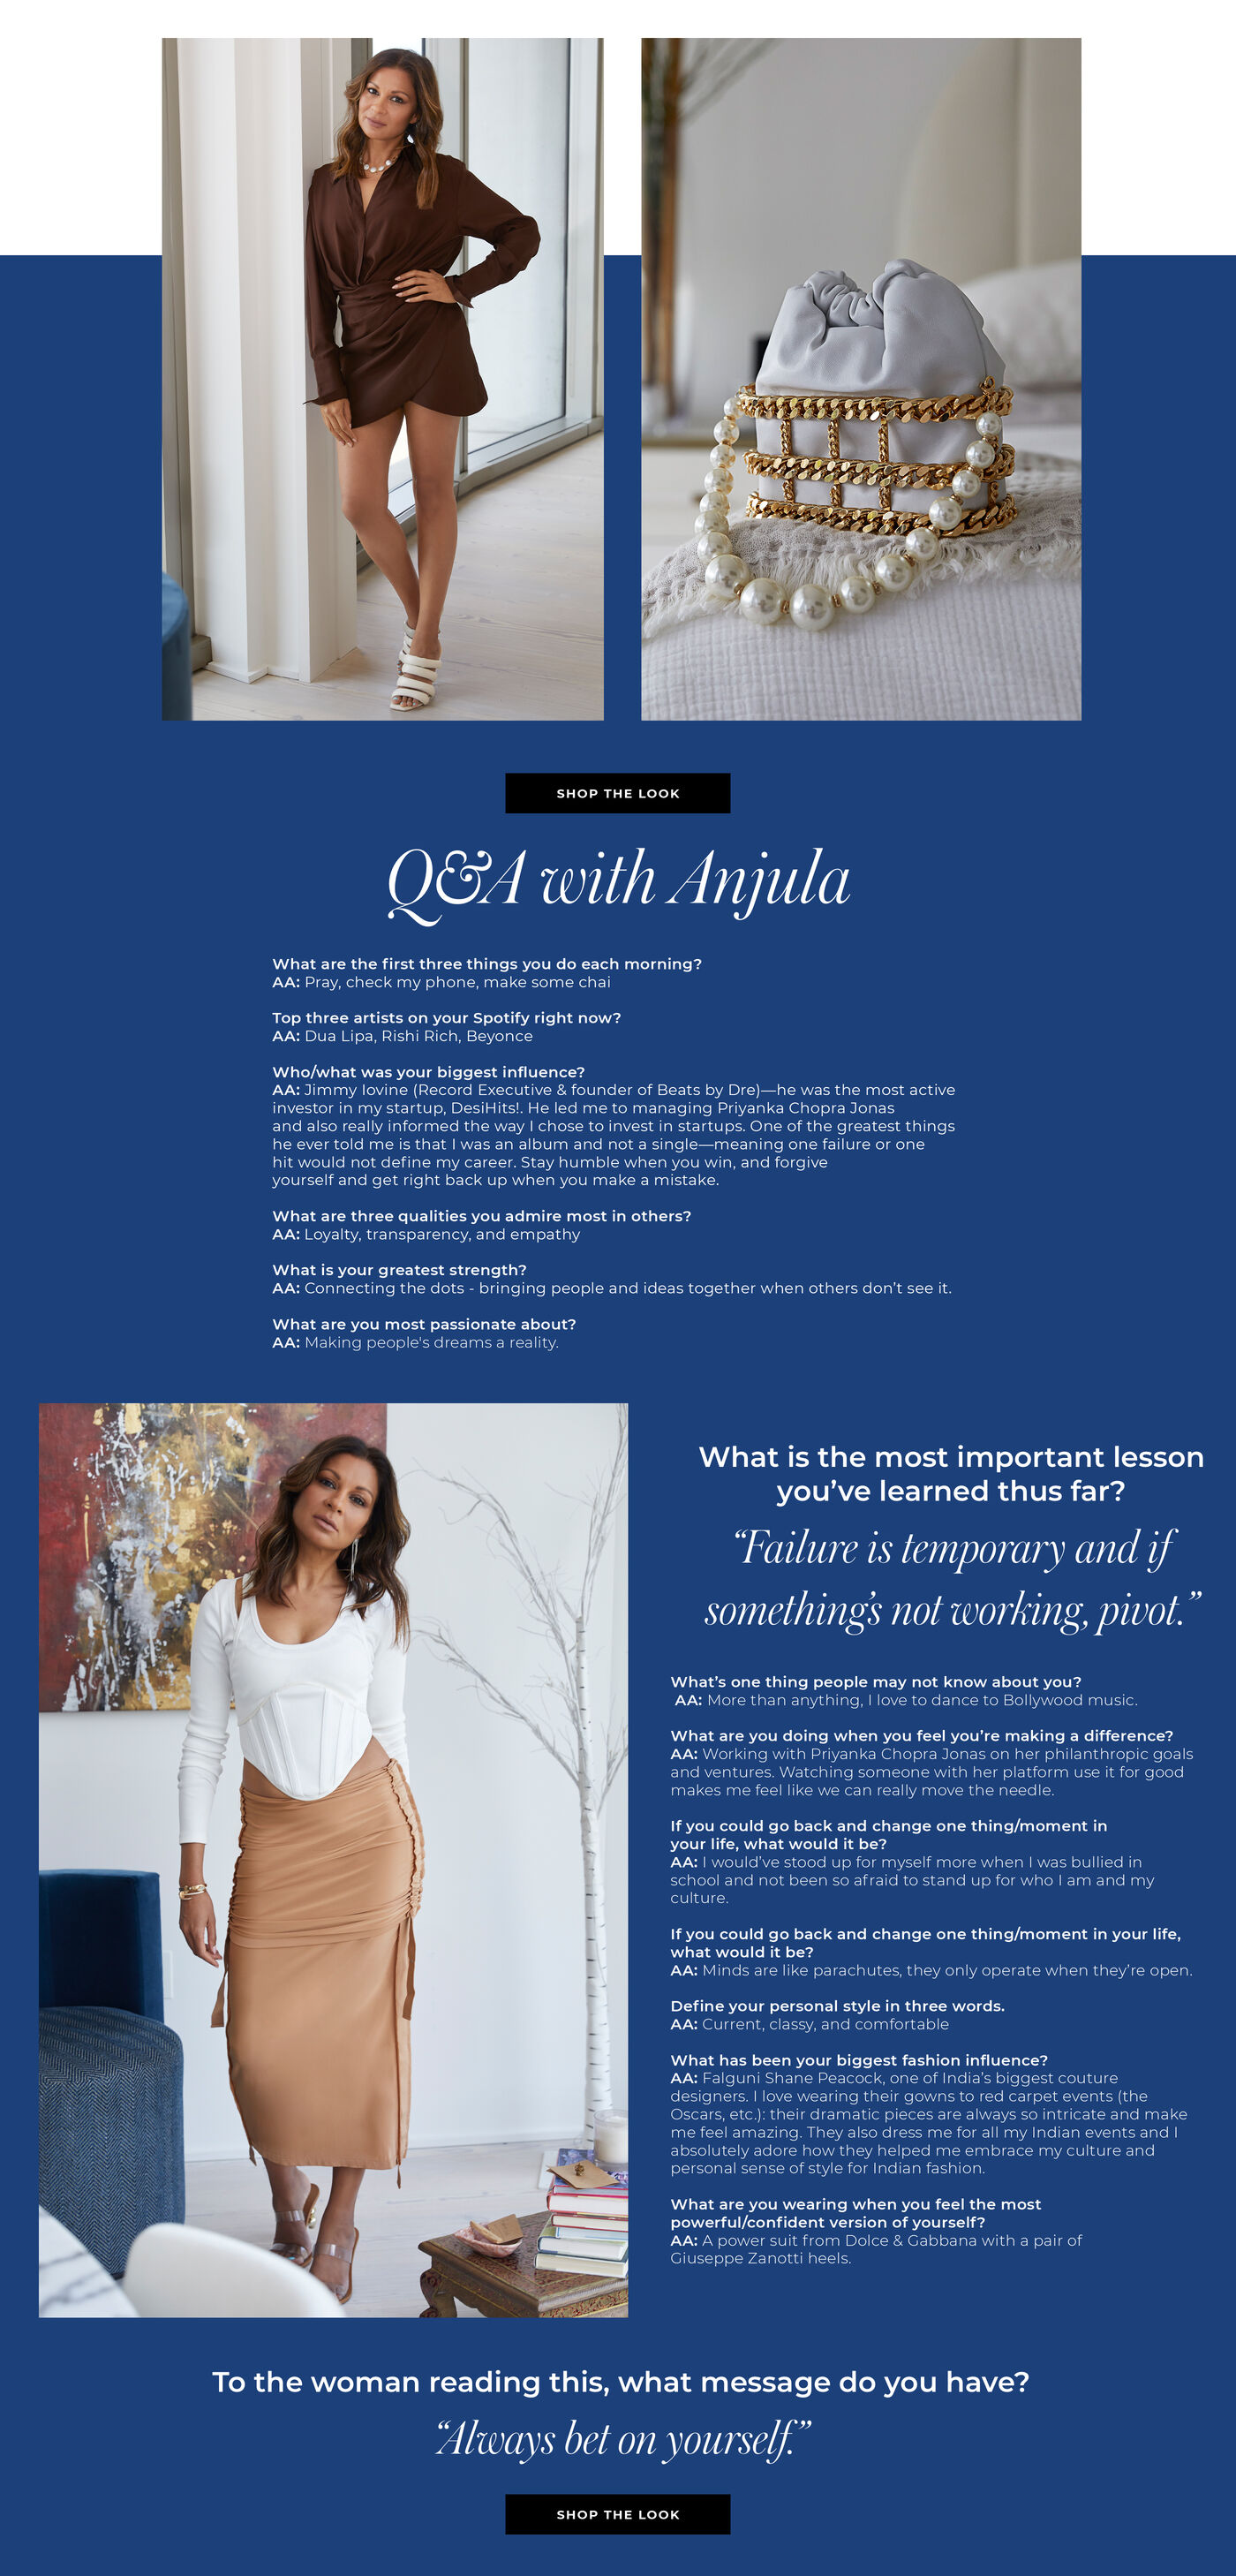 "Q&A WITH ANJULA What are the first three things you do each morning? Pray, check my phone, make some chai  Top three artists on your Spotify right now? Dua Lipa, Rishi Rich, Beyonce  Who/what was your biggest influence?  Jimmy Iovine (Record Executive & founder of Beats by Dre)—he was the most active investor in my startup, DesiHits!. He led me to managing Priyanka Chopra Jonas and also really informed the way I chose to invest in startups. One of the greatest things he ever told me is that I was an album and not a single—meaning one failure or one hit would not define my career. Stay humble when you win, and forgive yourself and get right back up when you make a mistake.   What are three qualities you admire most in others?  Loyalty, transparency, and empathy  What is your greatest strength? Connecting the dots - bringing people and ideas together when others don’t see it.   What are you most passionate about? Making people's dreams a reality.  What is the most important lesson you’ve learned thus far? ""Failure is temporary and if something’s not working, pivot. ""  What’s one thing people may not know about you? More than anything, I love to dance to Bollywood music.   What are you doing when you feel you’re making a difference? Working with Priyanka Chopra Jonas on her philanthropic goals and ventures. Watching someone with her platform use it for good makes me feel like we can really move the needle.   If you could go back and change one thing/moment in your life, what would it be? I would’ve stood up for myself more when I was bullied in school and not been so afraid to stand up for who I am and my culture.   Define your personal style in three words. Current, classy, and comfortable   What has been your biggest fashion influence? Falguni Shane Peacock, one of India’s biggest couture designers. I love wearing their gowns to red carpet events (the Oscars, etc.): their dramatic pieces are always so intricate and make me feel amazing. They also dress me for all my Indian events and I absolutely adore how they helped me embrace my culture and personal sense of style for Indian fashion.   What are you wearing when you feel the most powerful/confident version of yourself? A power suit from Dolce & Gabbana with a pair of Giuseppe Zanotti heels.    To the woman reading this, what message do you have? ""Always bet on yourself."" "